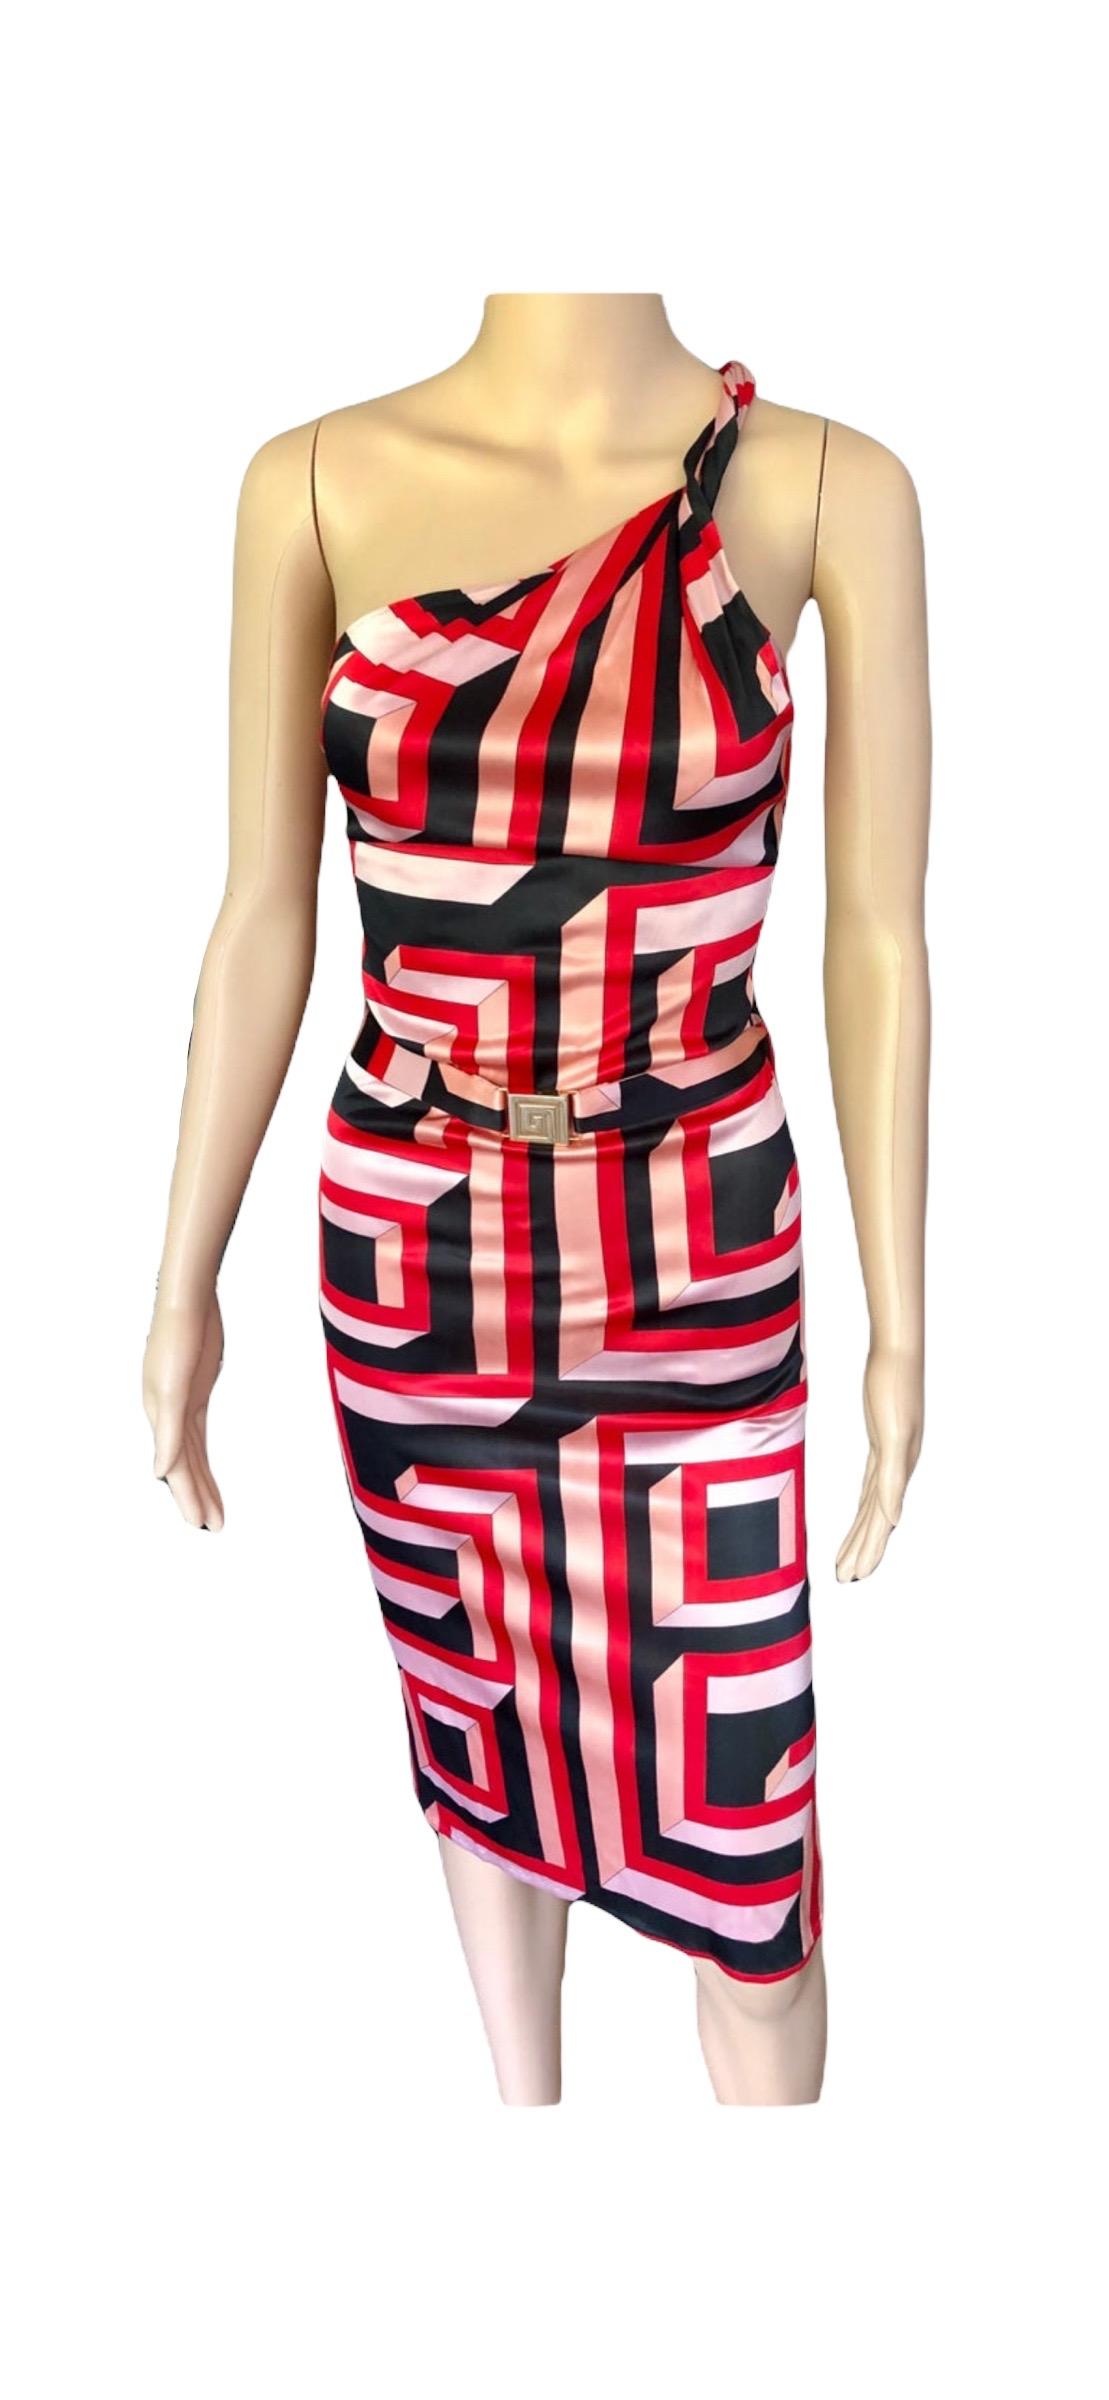 Gianni Versace S/S 2001 Vintage Geometric Print Belted Open Back Dress For Sale 8